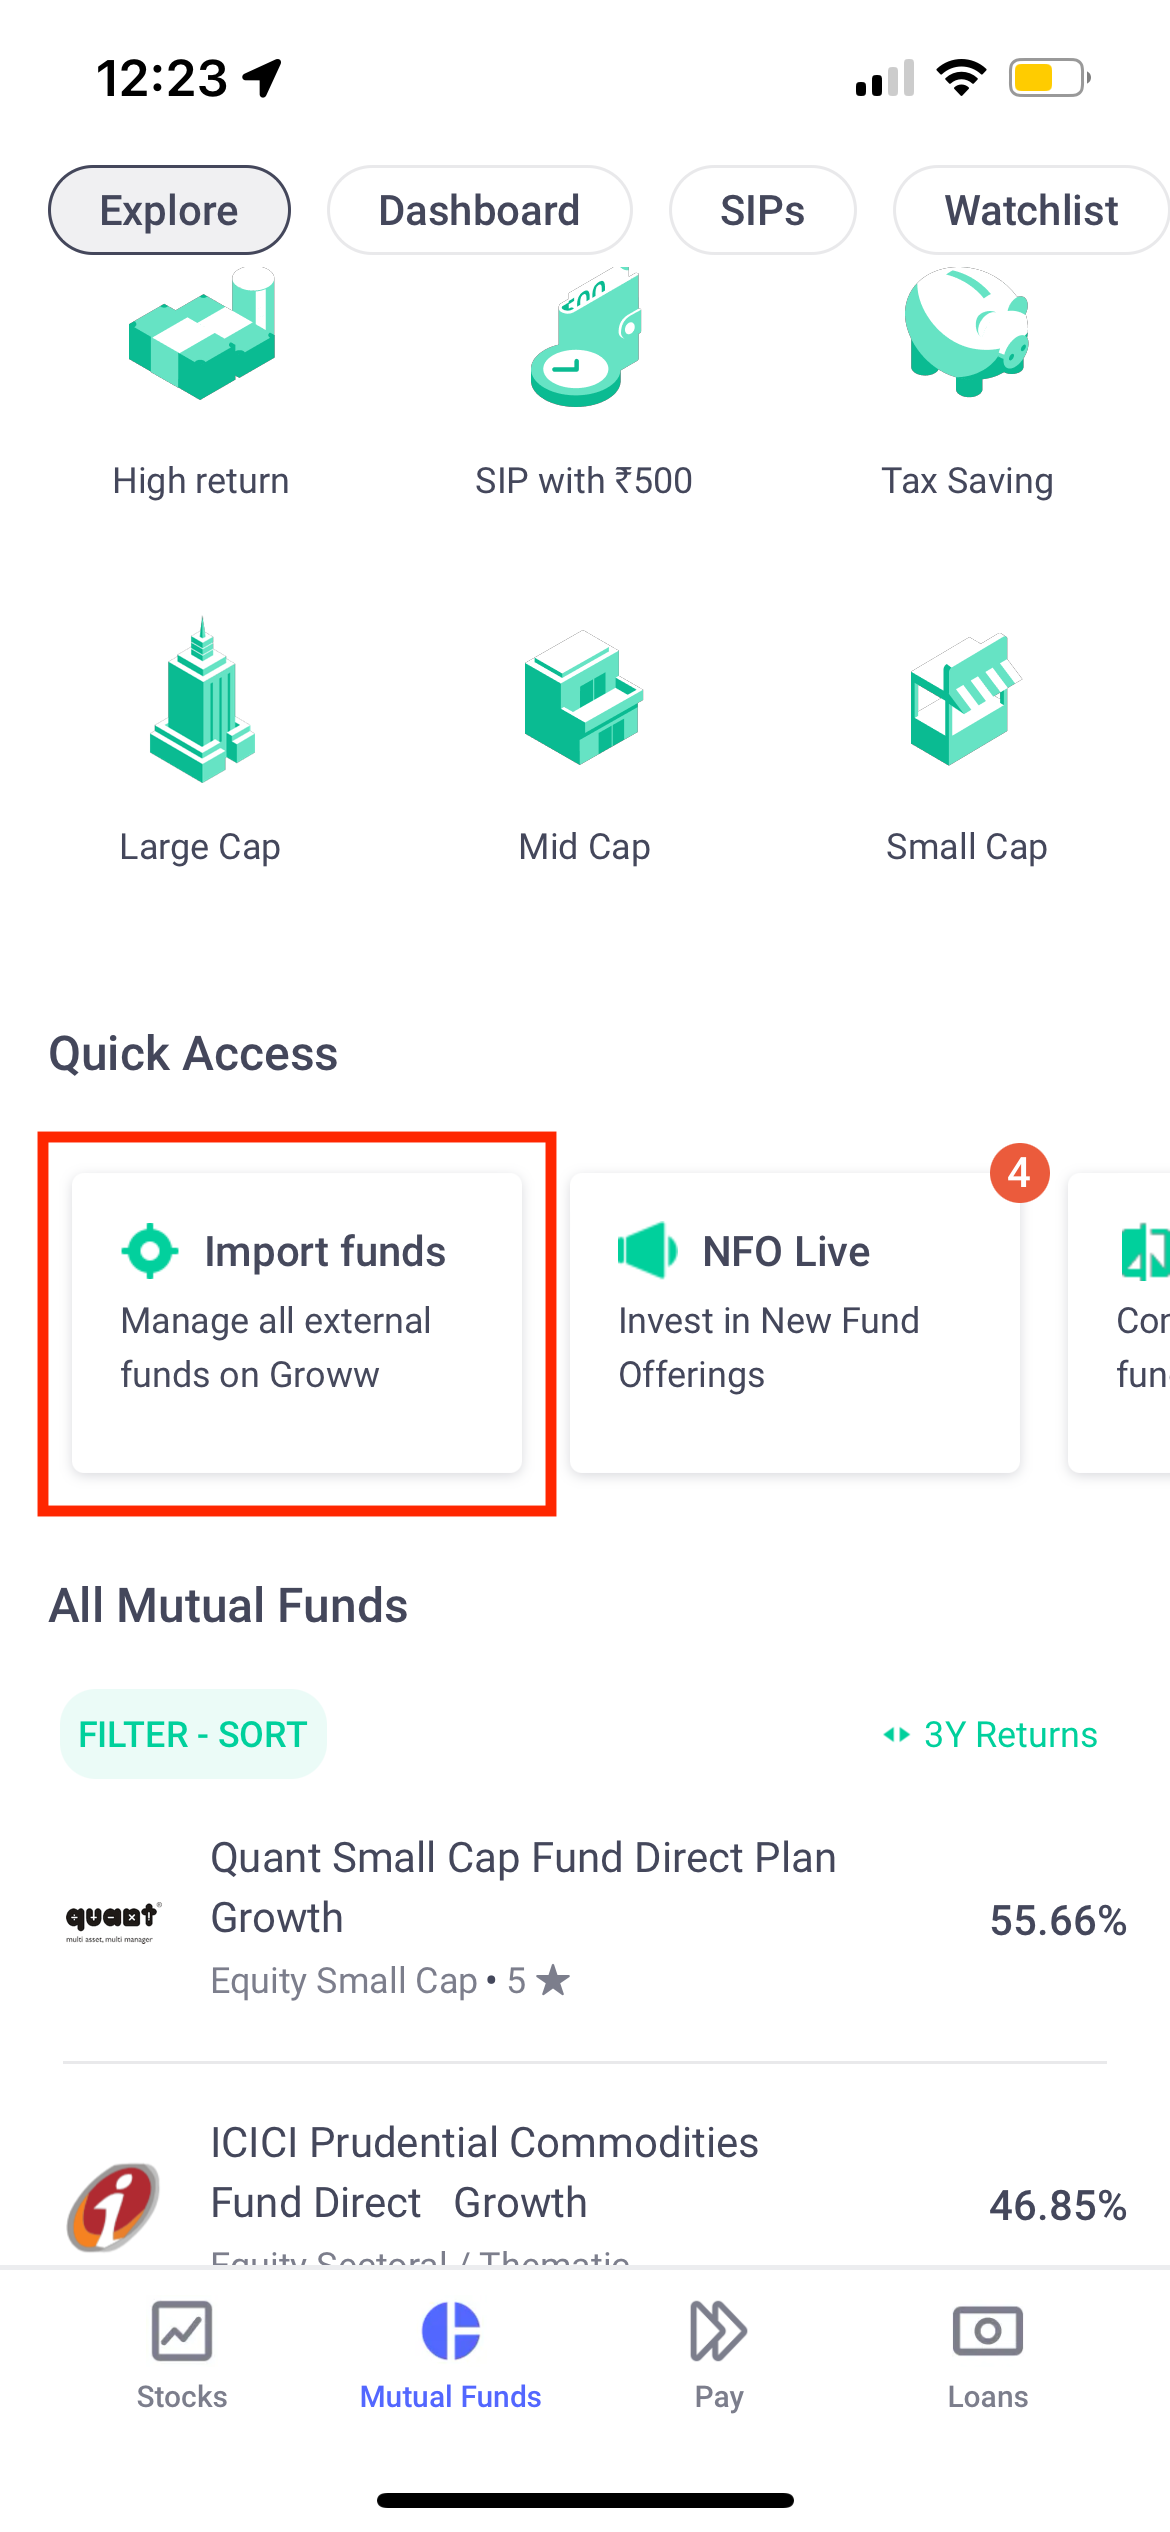 Manage All External Funds on Groww